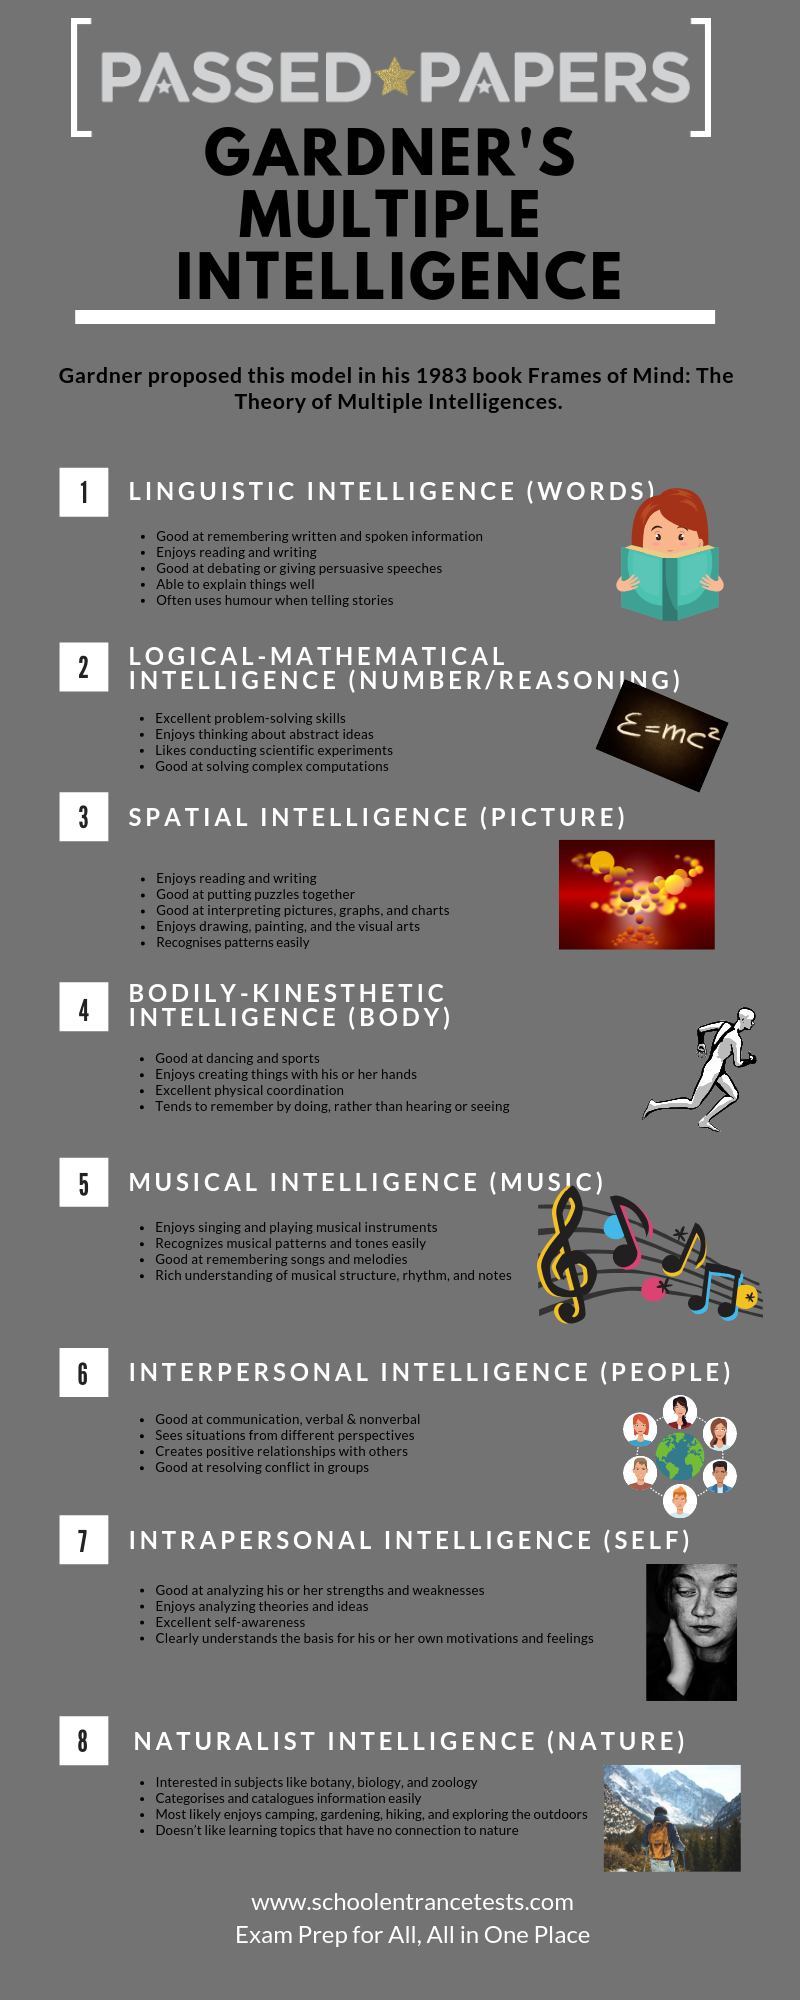 Theory of multiple intelligence infographic